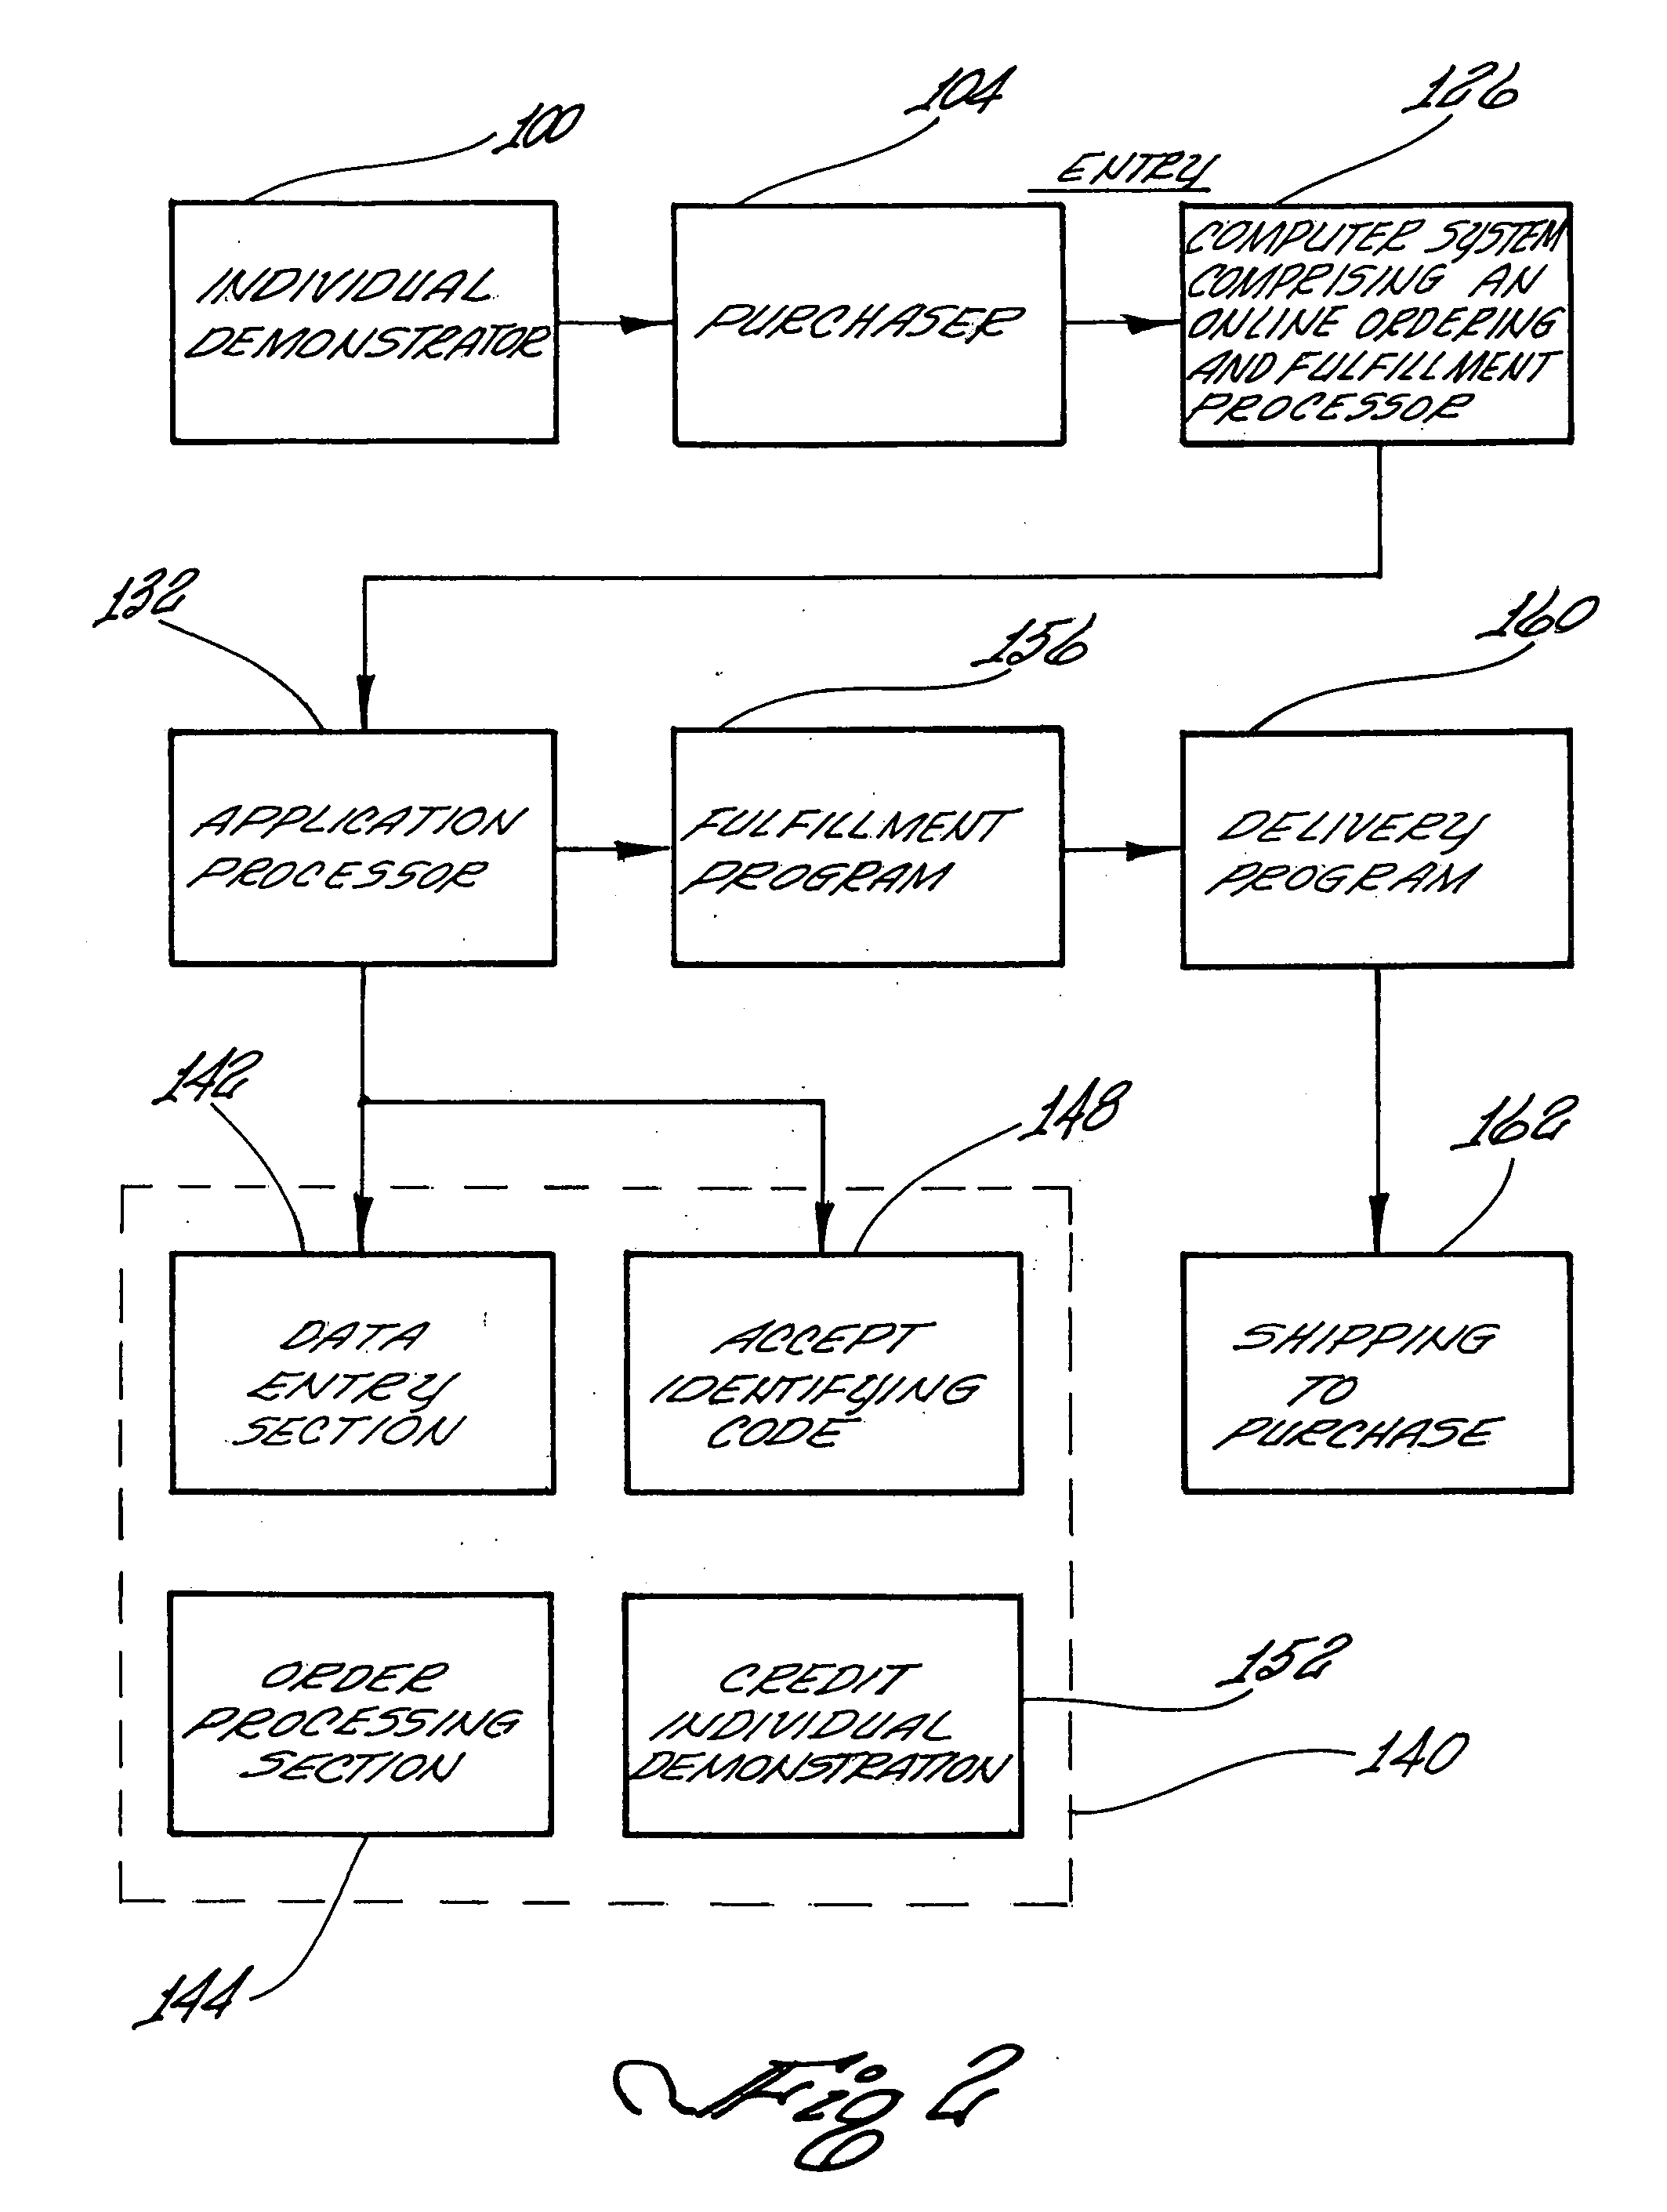 System for originating and consummating sales and method